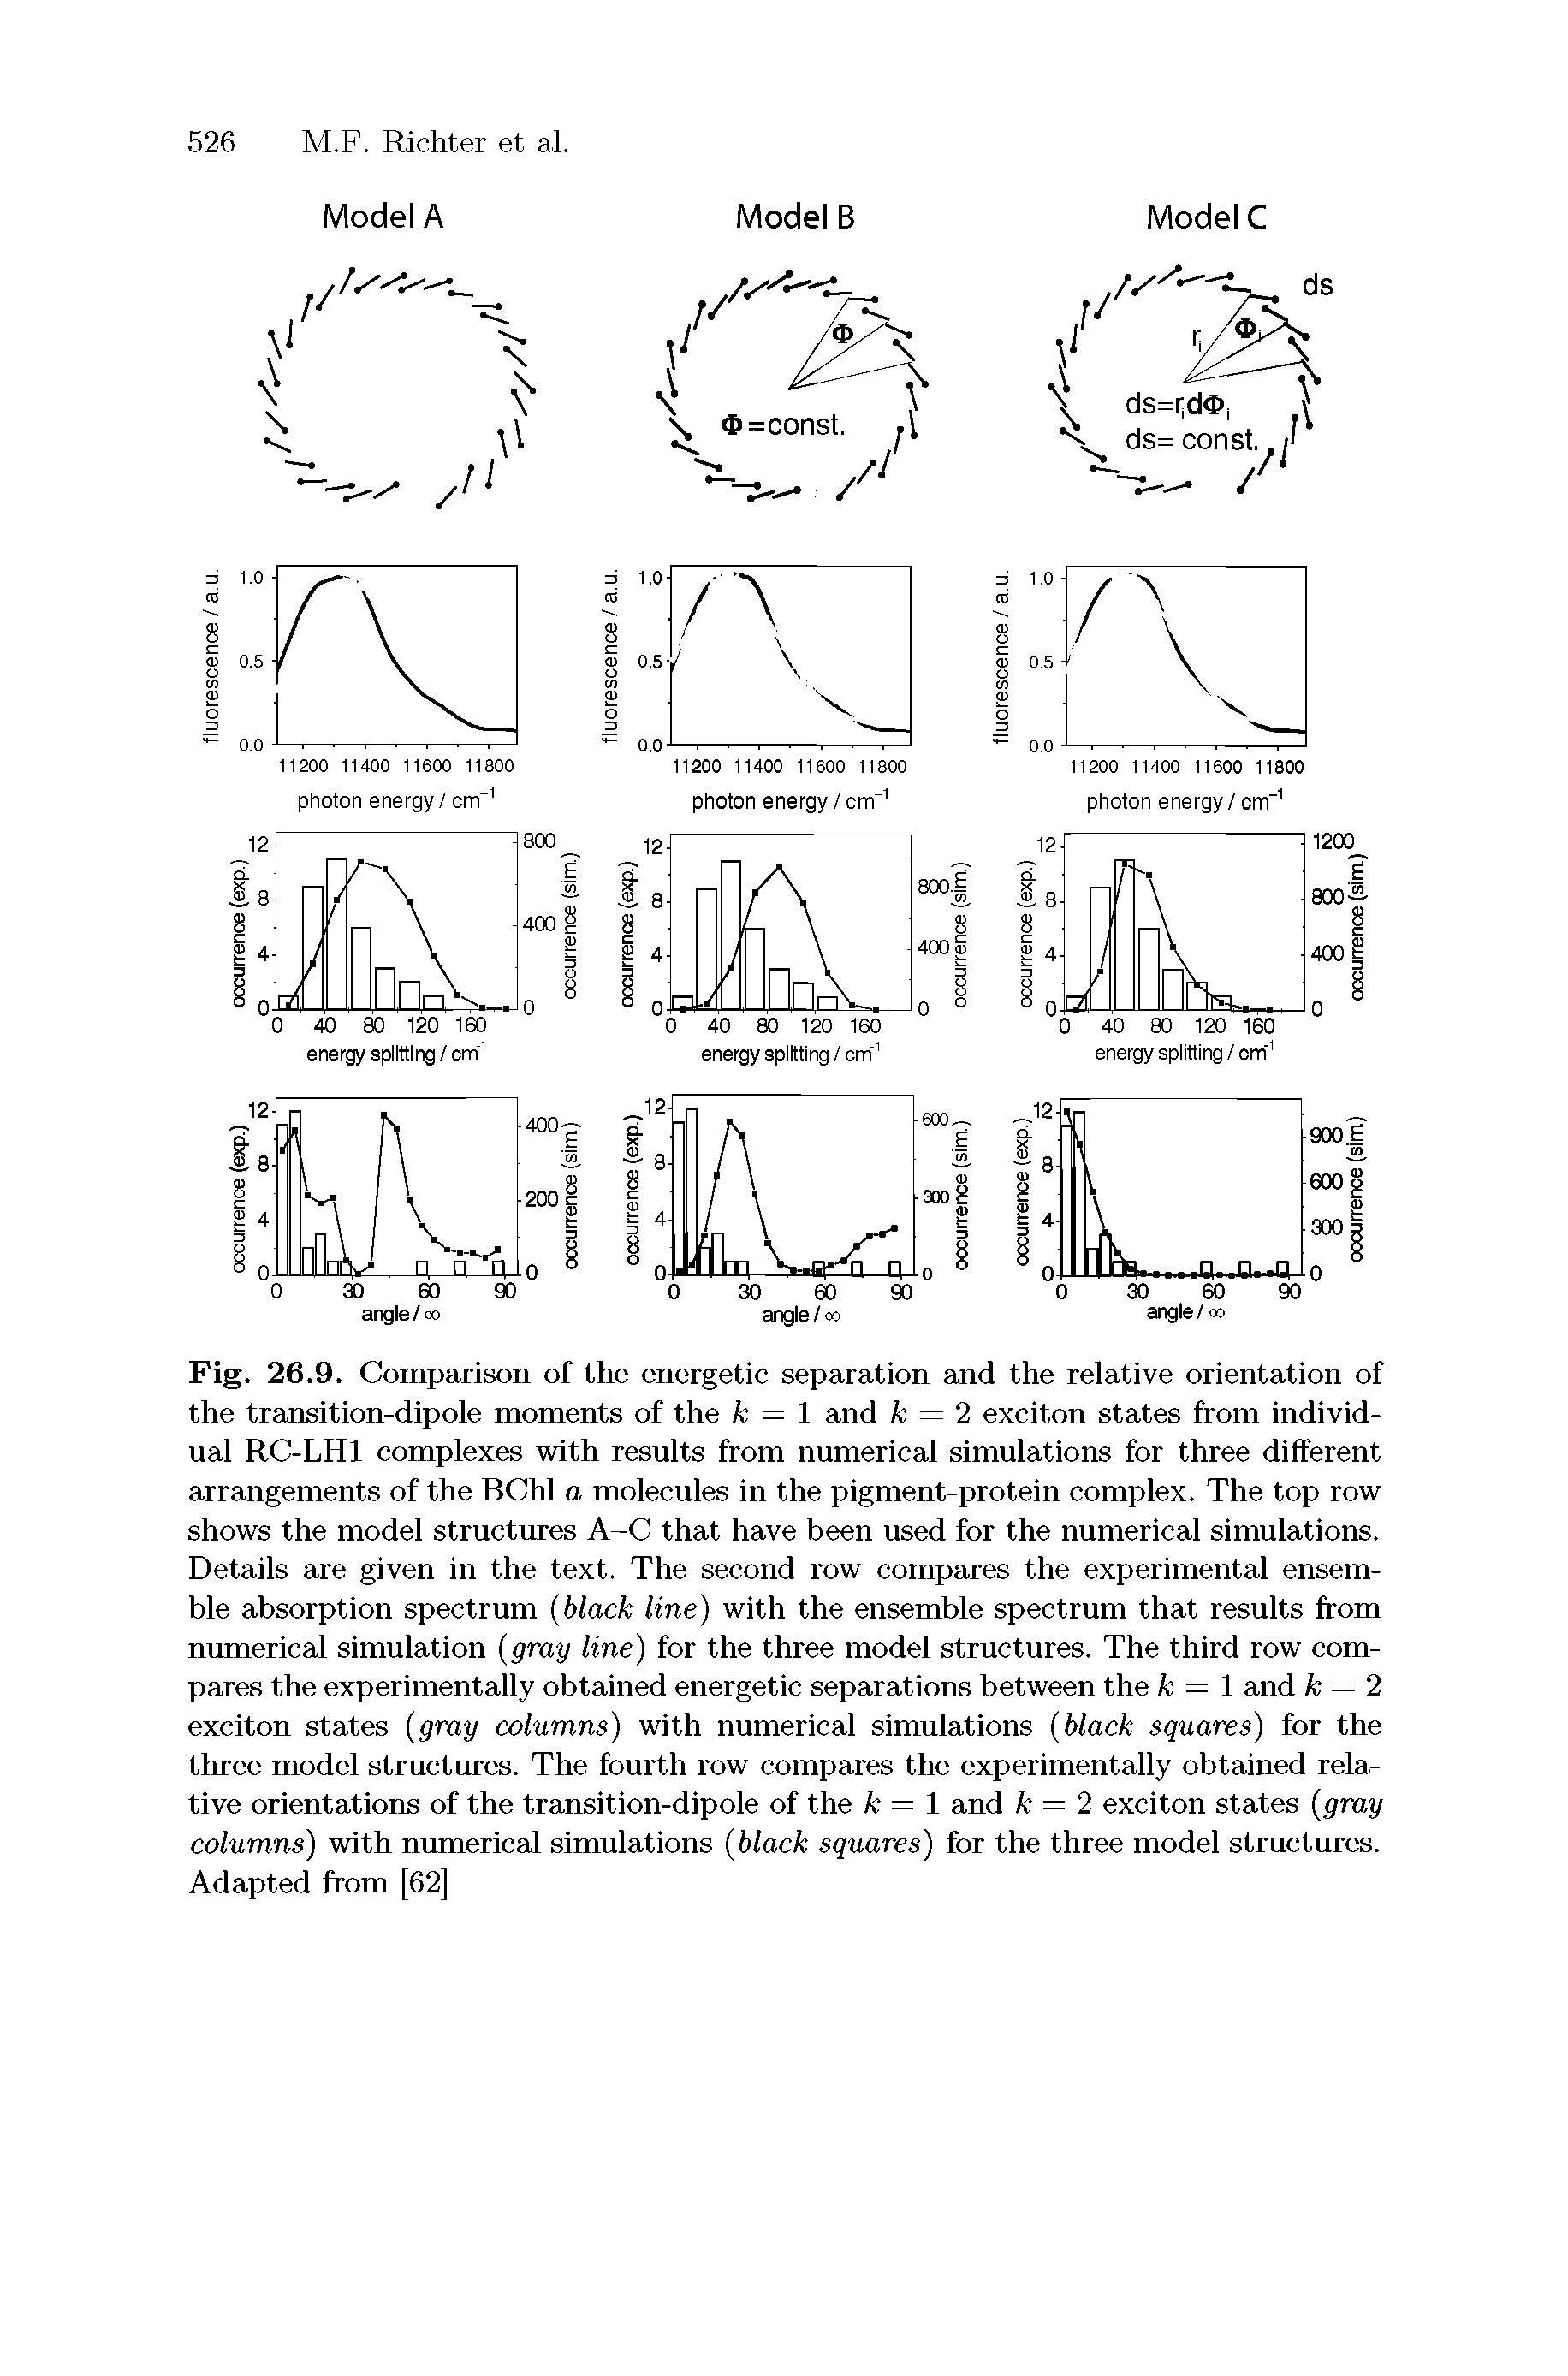 Fig. 26.9. Comparison of the energetic separation and the relative orientation of the transition-dipole moments of the k = 1 and k = 2 exciton states from individual RC-LHl complexes with results from numerical simulations for three different arrangements of the BChl a molecules in the pigment-protein complex. The top row shows the model structures A-C that have been used for the numerical simulations. Details are given in the text. The second row compares the experimental ensemble absorption spectrum (black line) with the ensemble spectrum that results from numerical simulation (gray line) for the three model structures. The third row compares the experimentally obtained energetic separations between the k = 1 and k = 2 exciton states (gray columns) with numerical simulations (black squares) for the three model structures. The fourth row compares the experimentally obtained relative orientations of the transition-dipole of the A = 1 and k = 2 exciton states (gray columns) with numerical simulations (black squares) for the three model structures. Adapted from [62]...